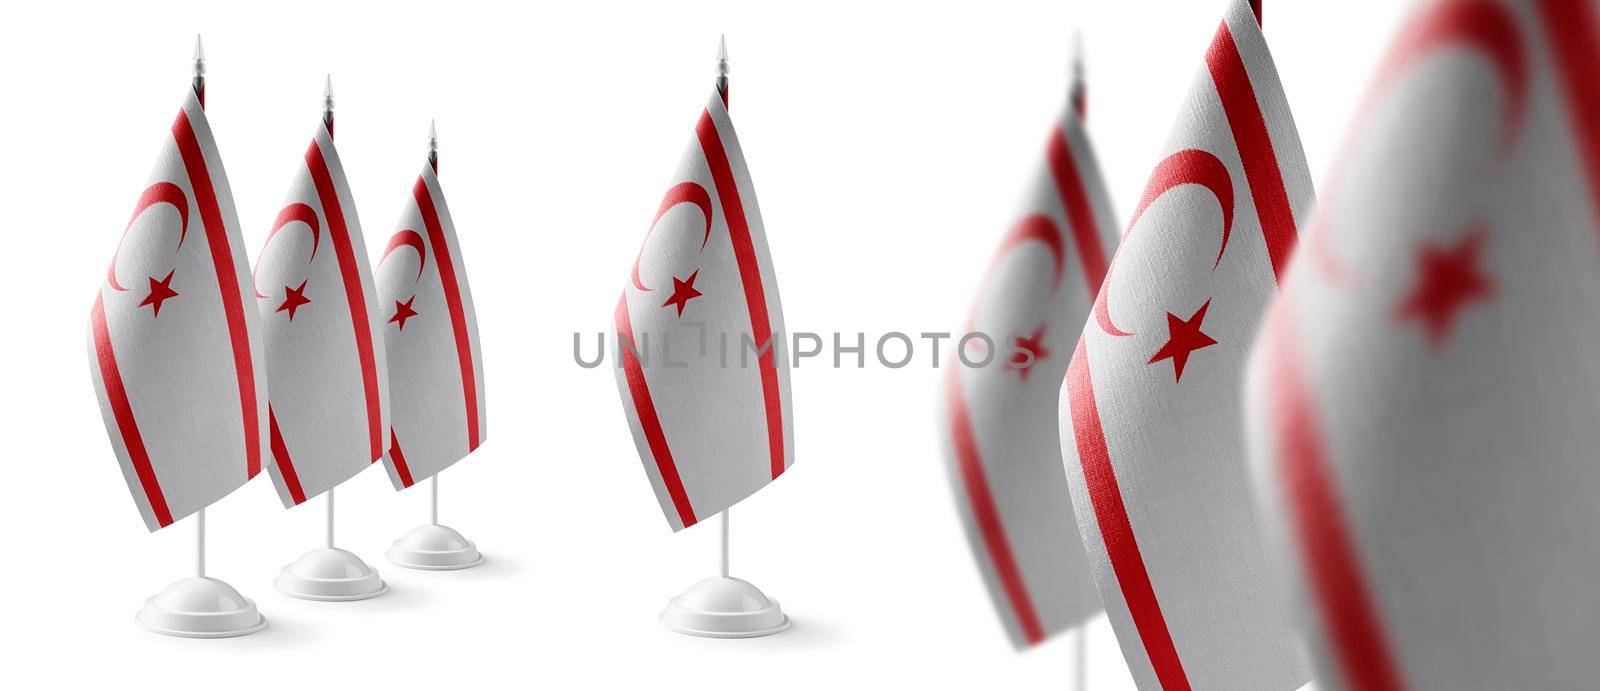 Set of Northern Cyprus national flags on a white background.